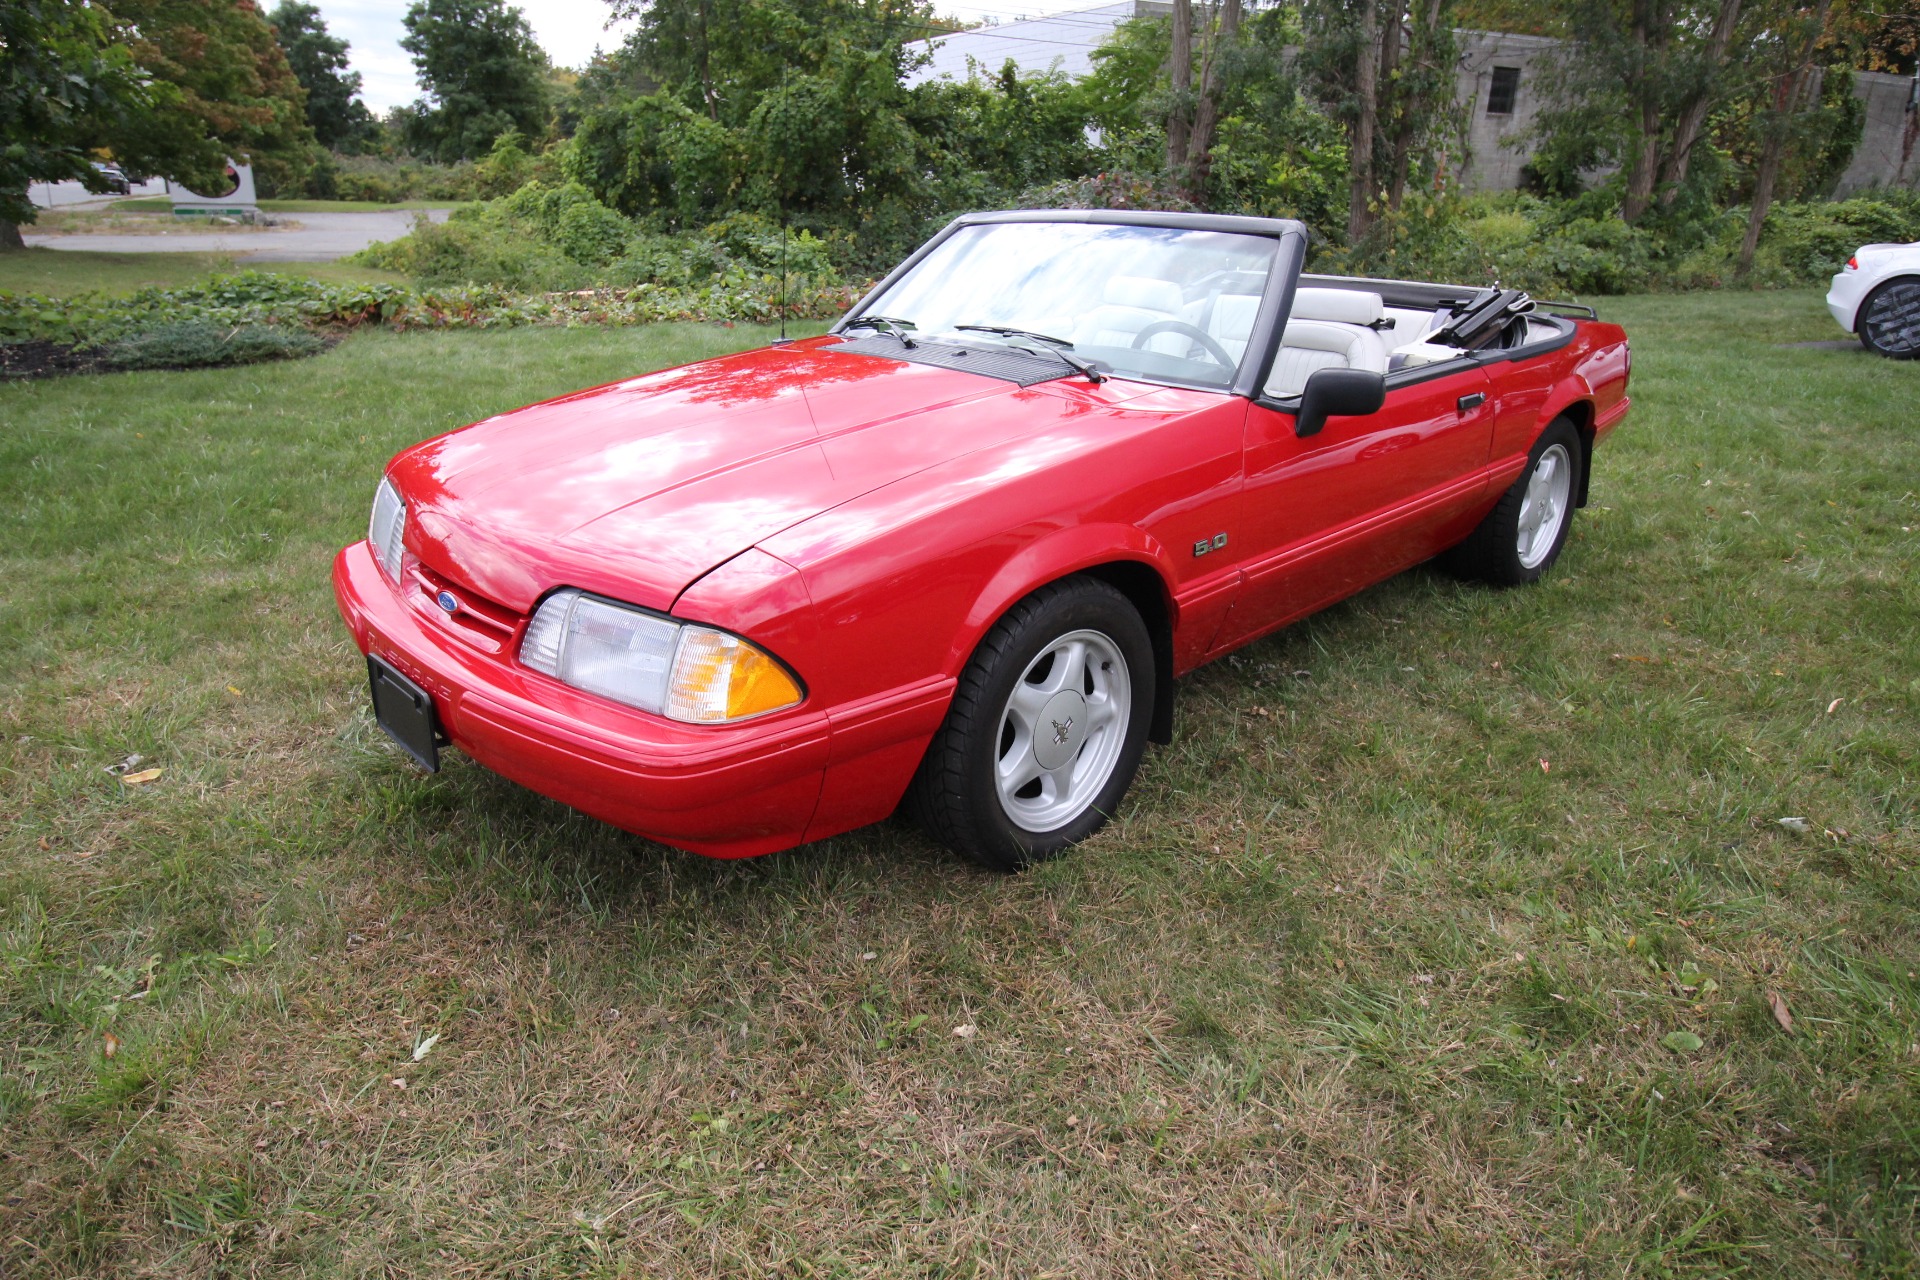 Used 1993 Ford Mustang LX 5.0L CONVERTIBLE 5 SPEED MANUAL RARE CAR RARE CONDITION | Albany, NY